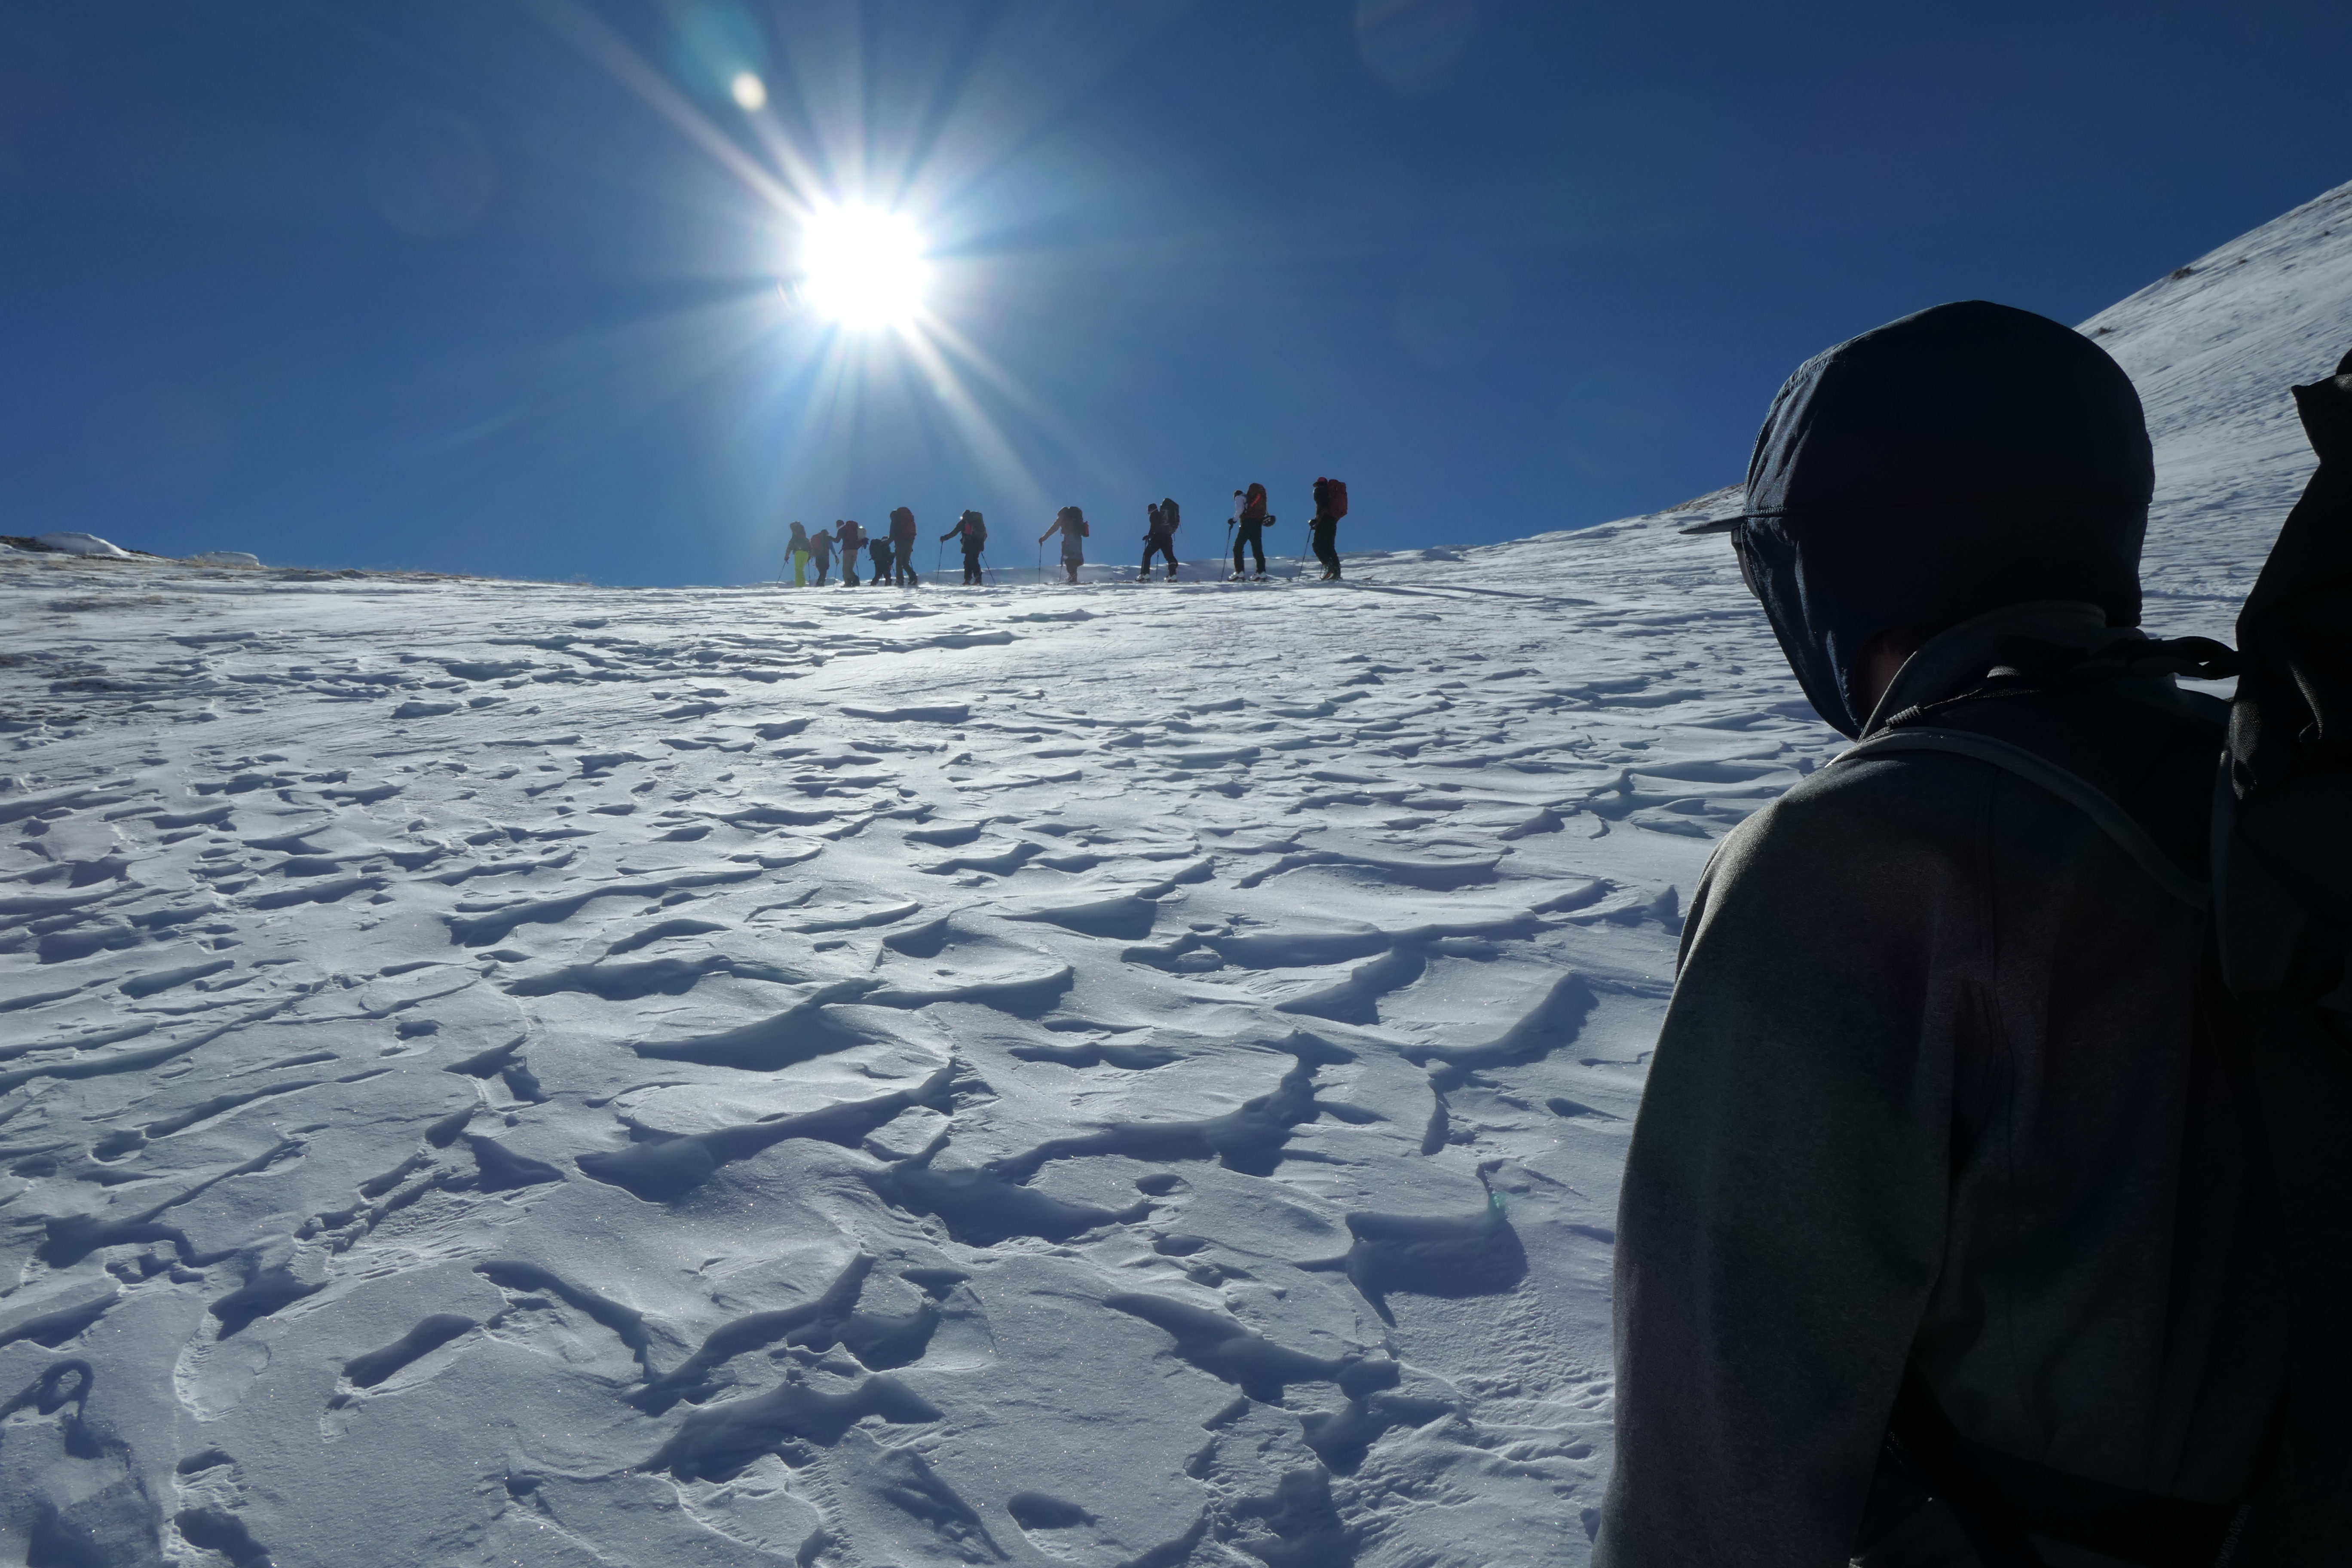 Vets winter expedition